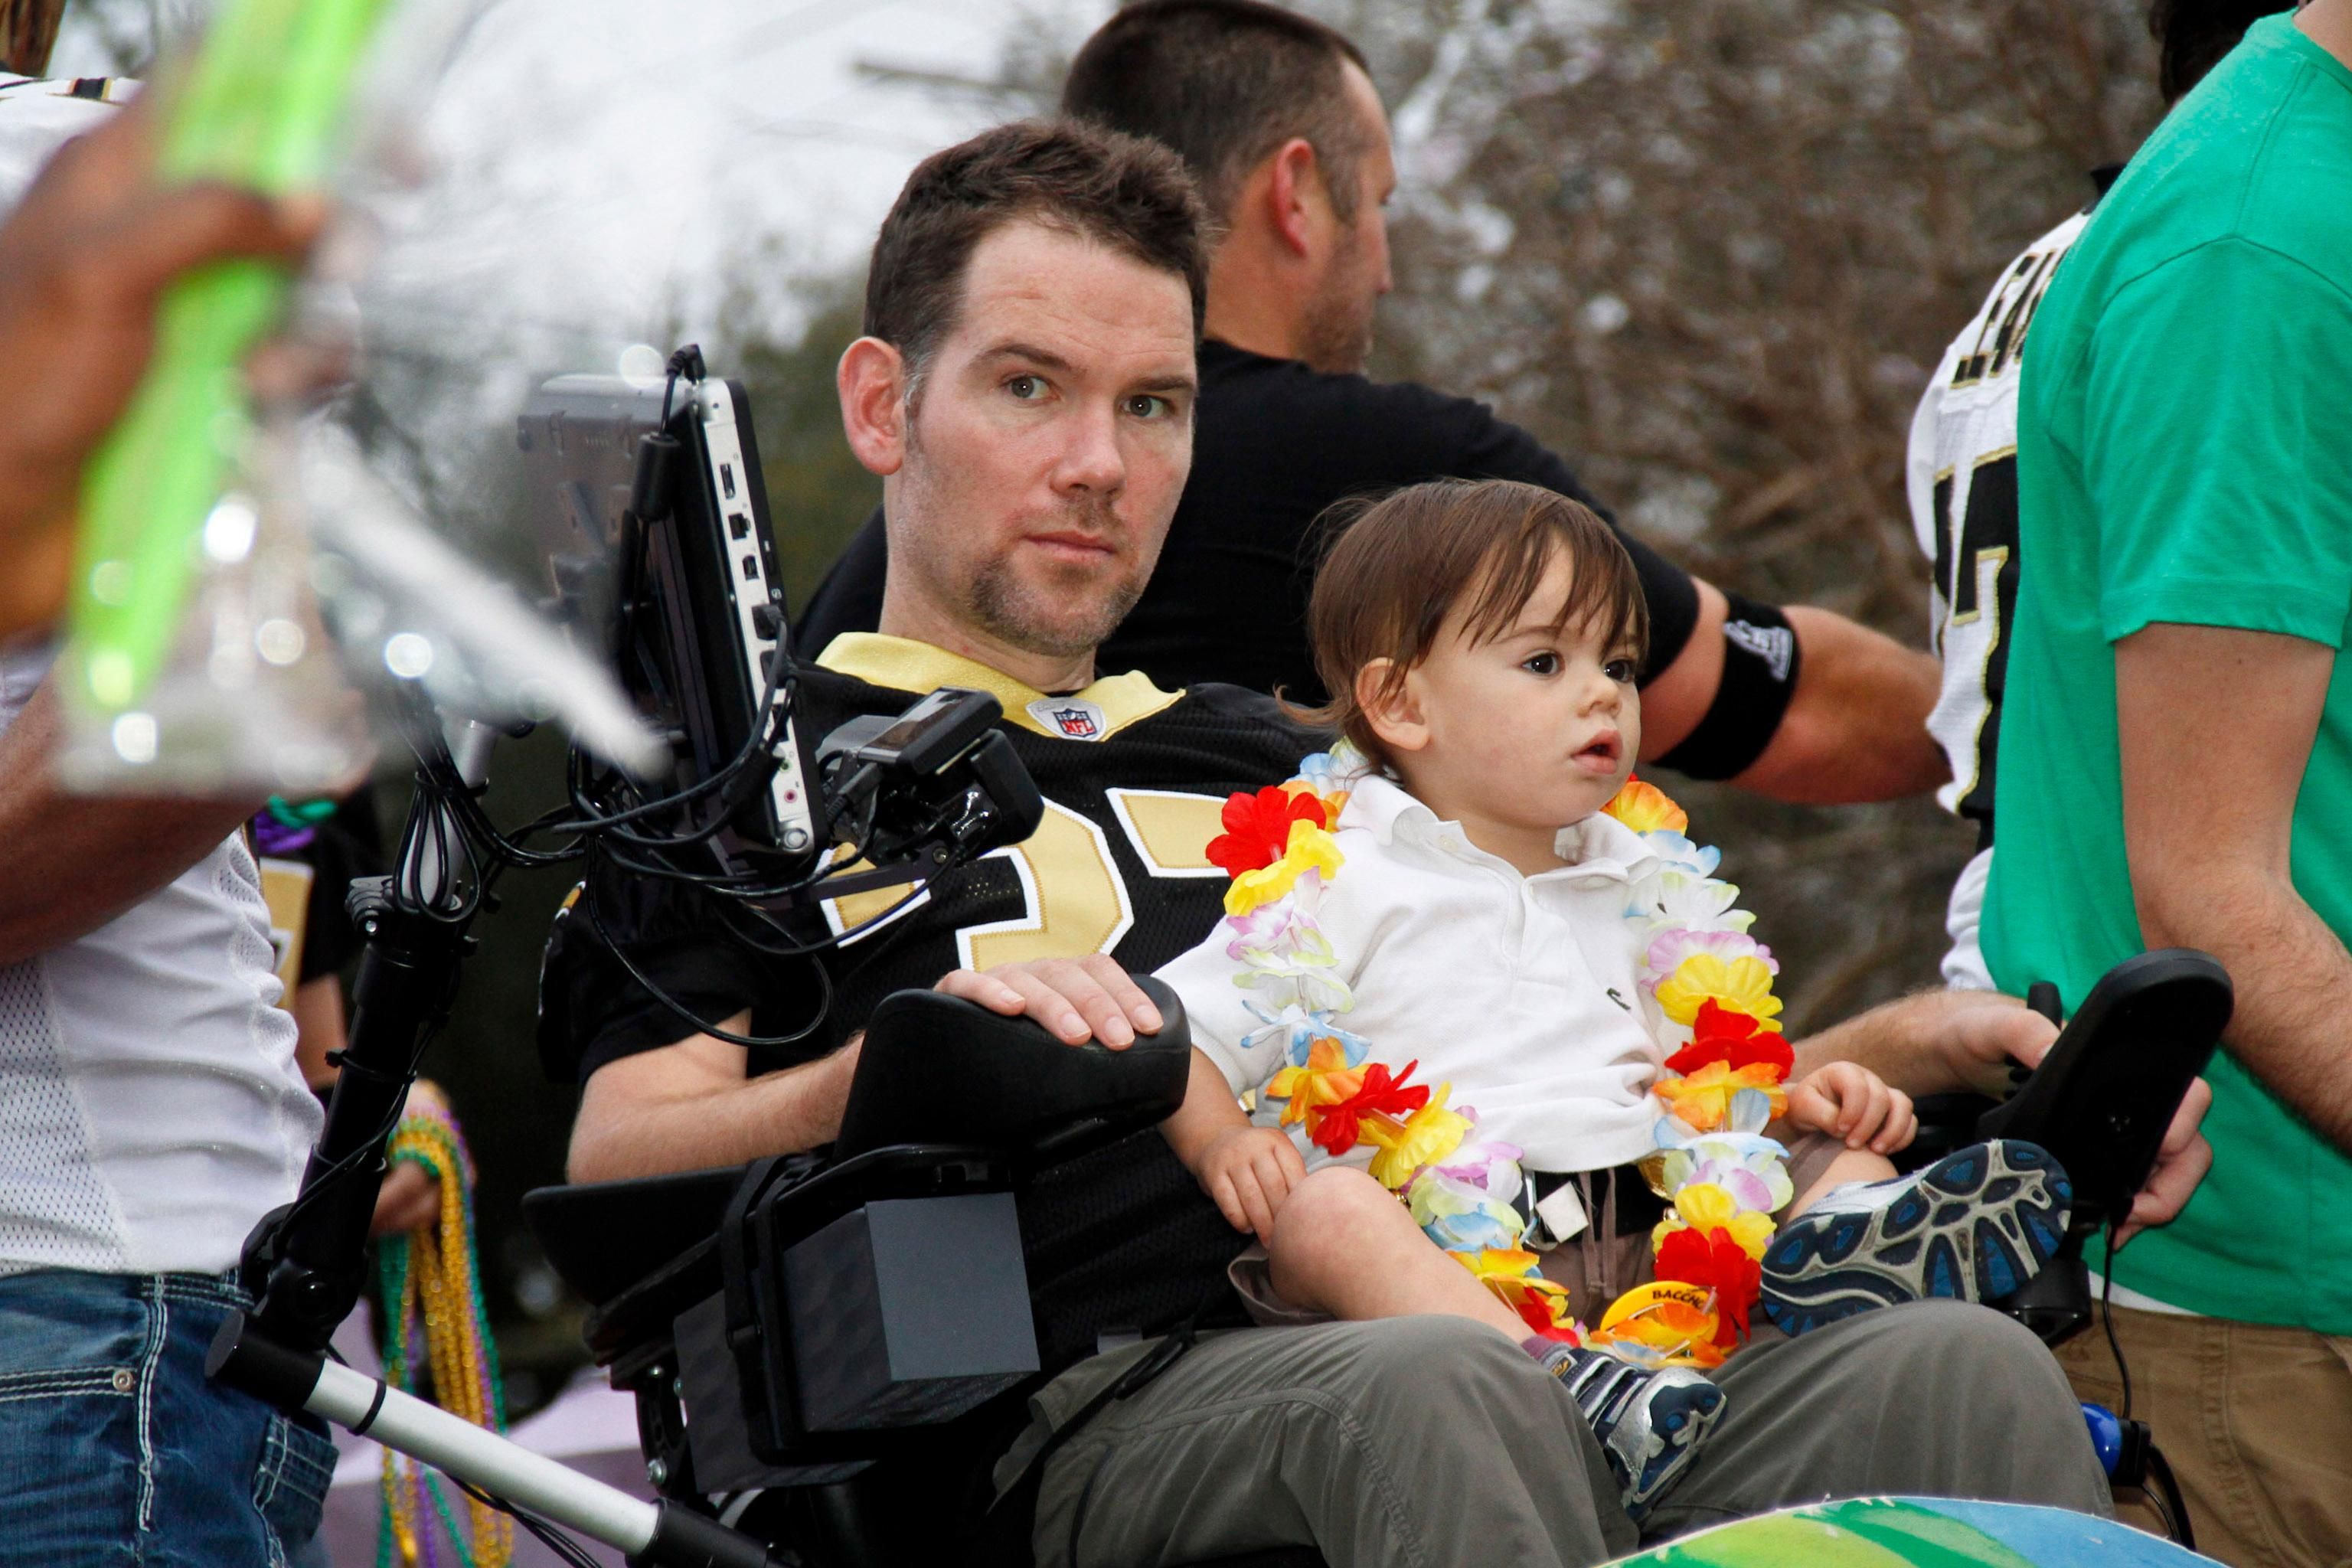 ALS patient Steve Gleason attends an event to raise awareness about the disease